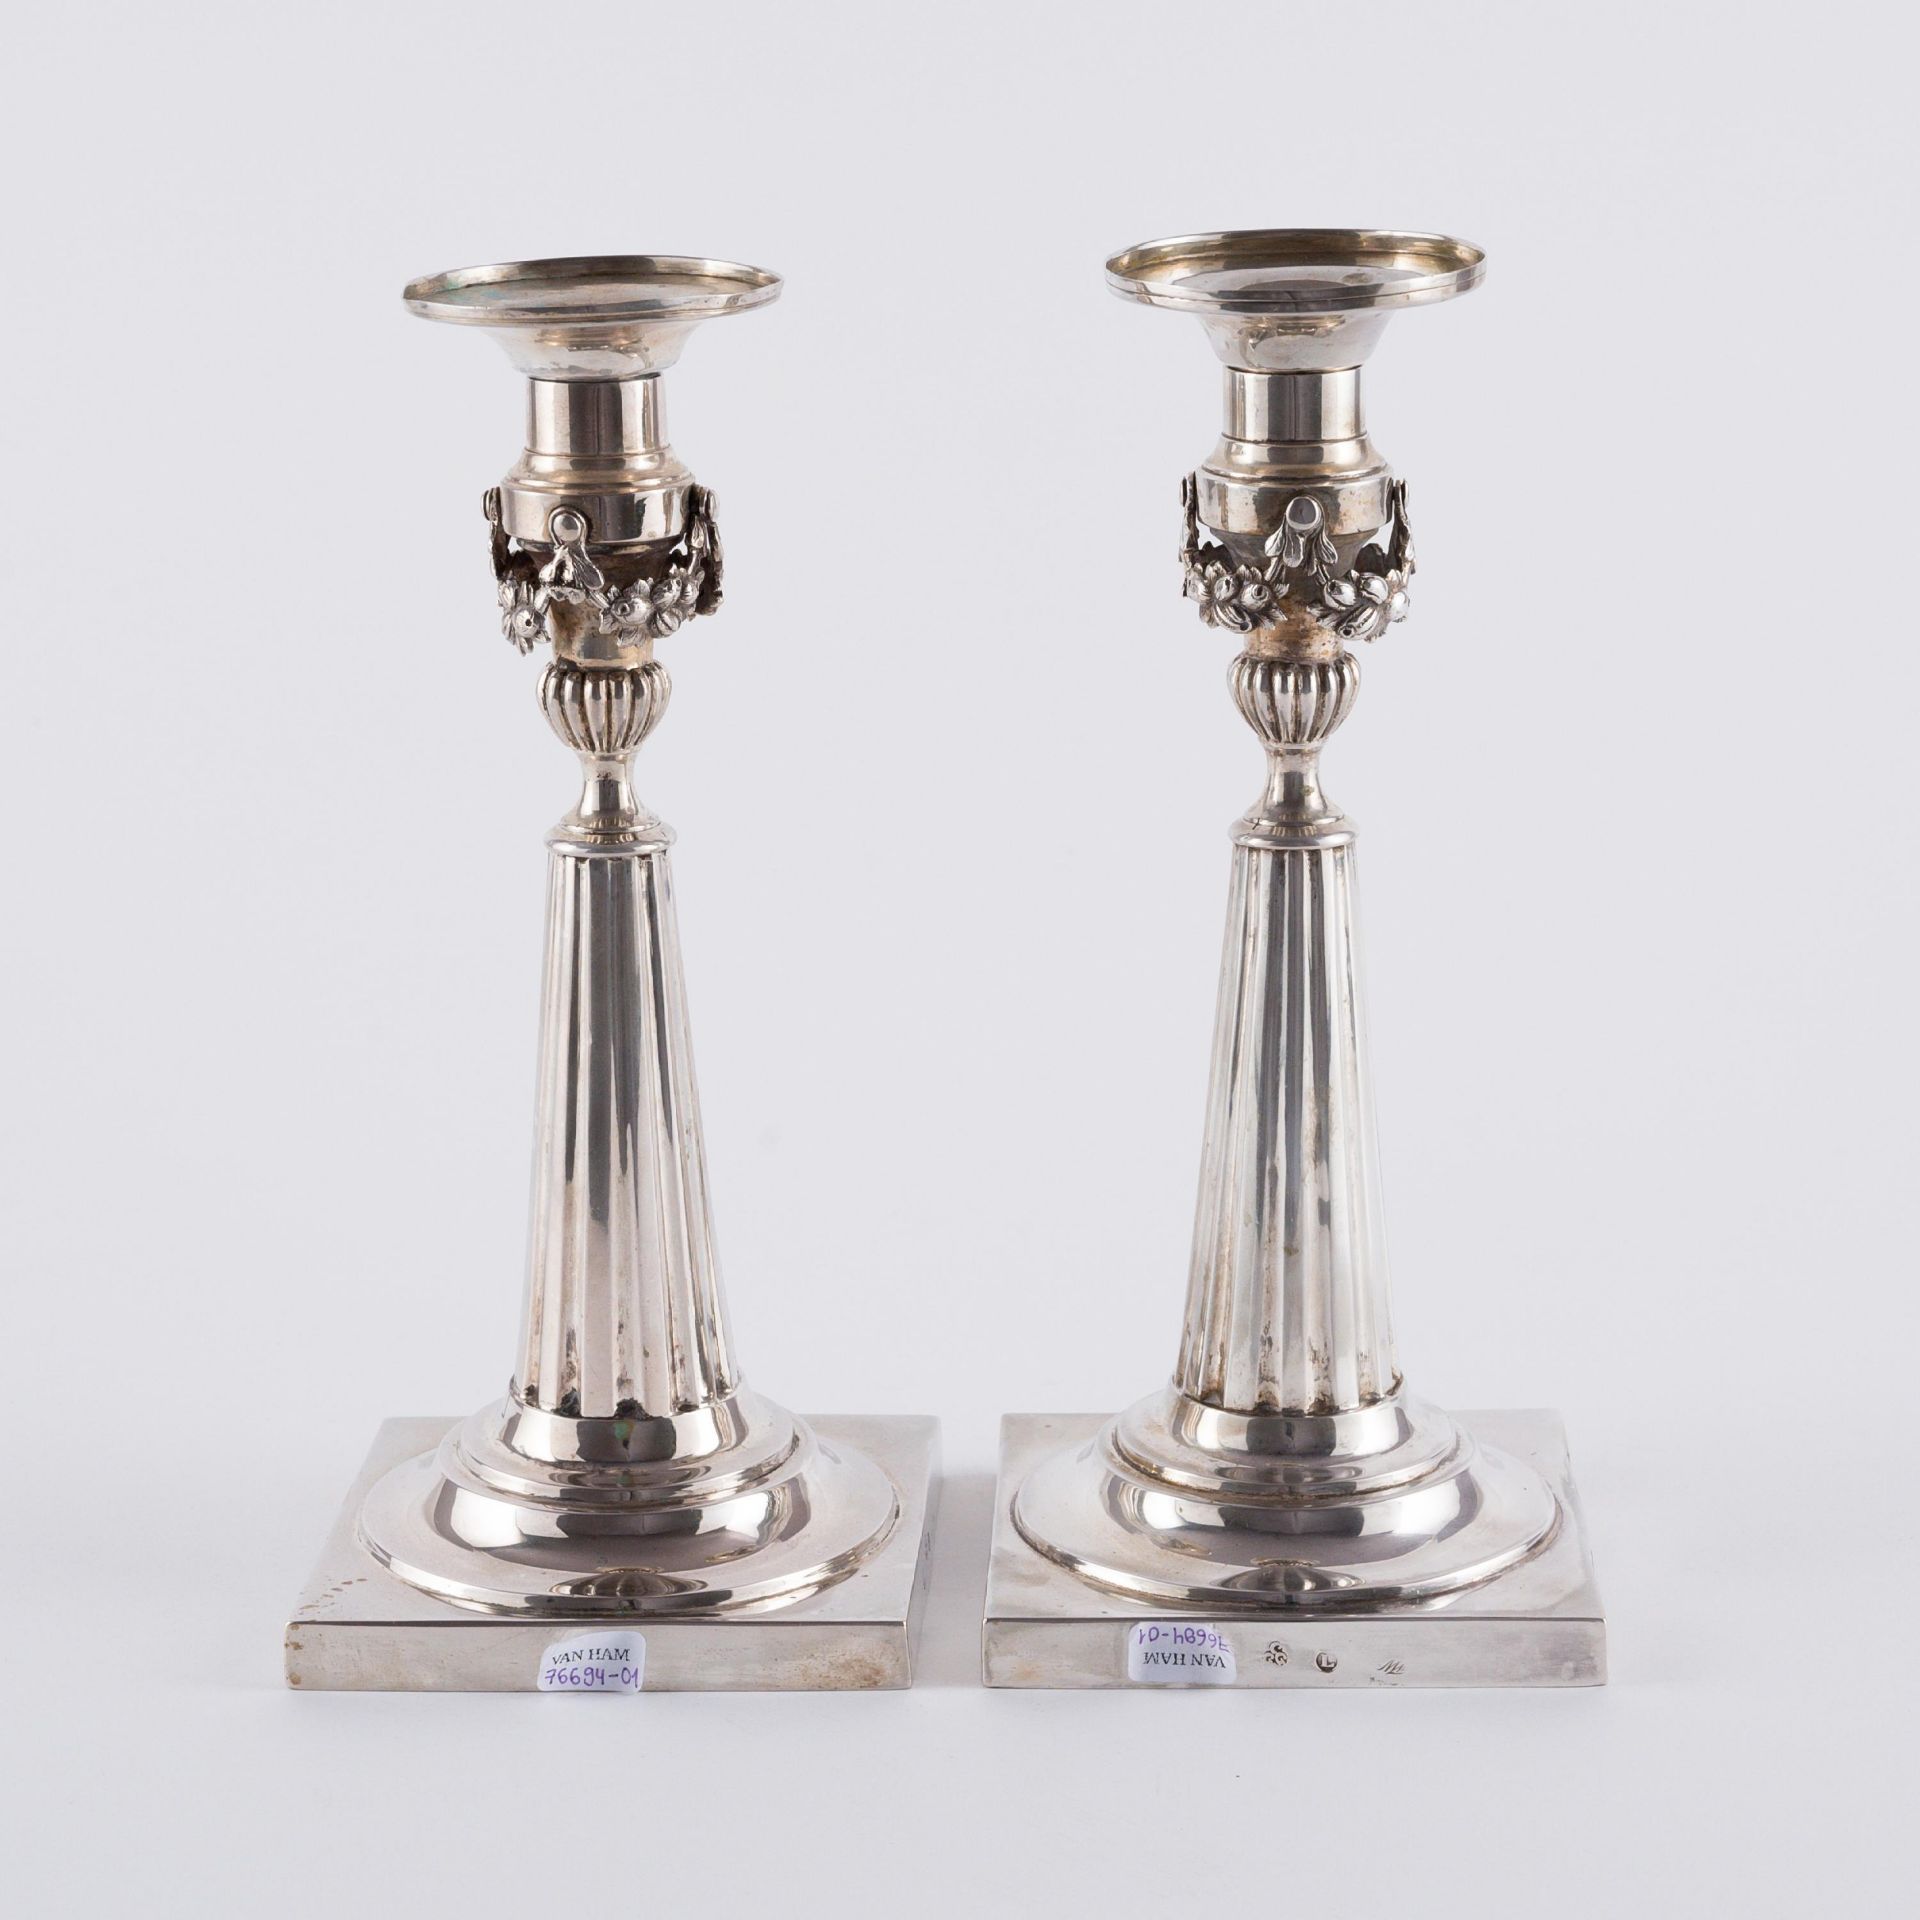 Carl Gottlieb Gröger: PAIR OF SILVER CANDLESTICKS WITH FLUTED SHAFT AND FESTOONS - Image 3 of 6